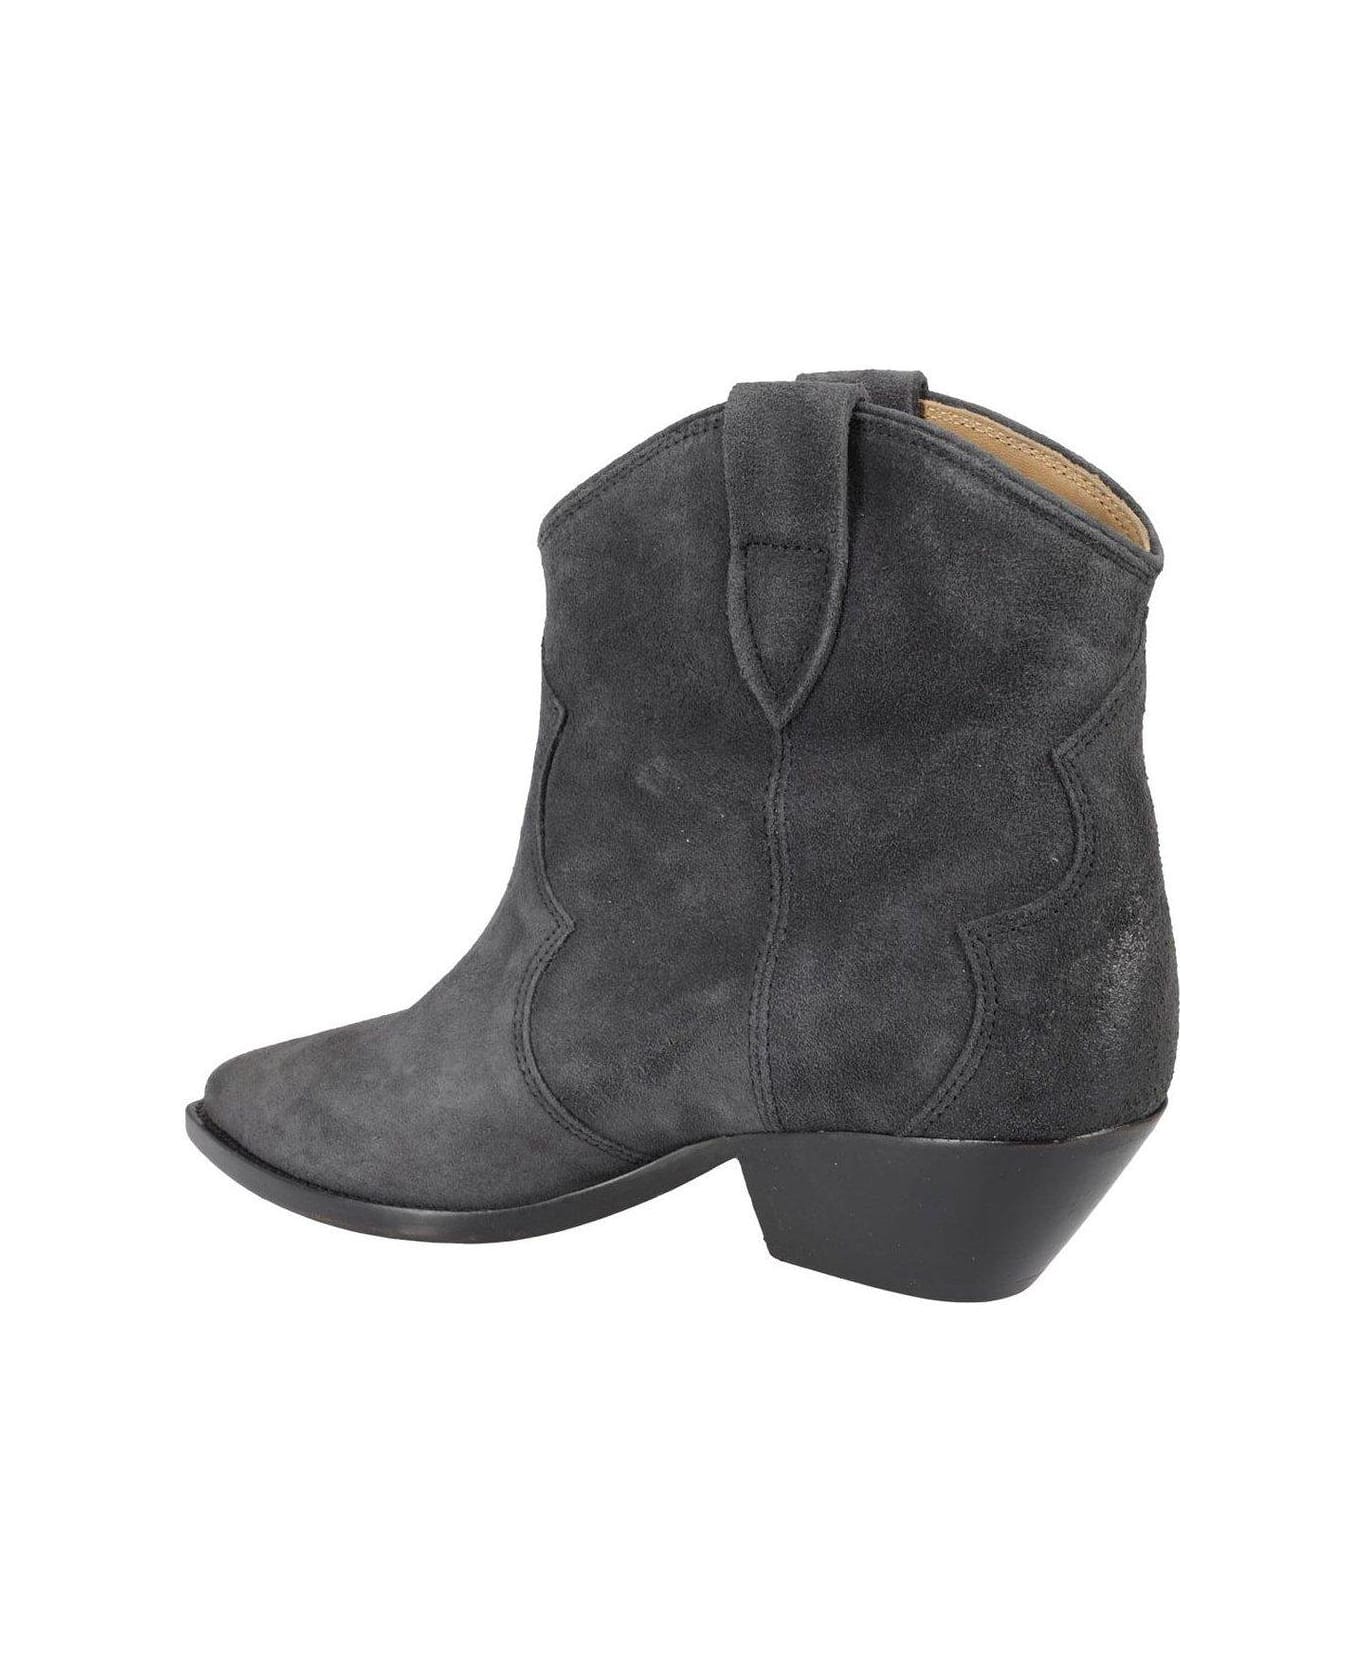 Isabel Marant Pointed Toe Ankle Boots - Black ブーツ